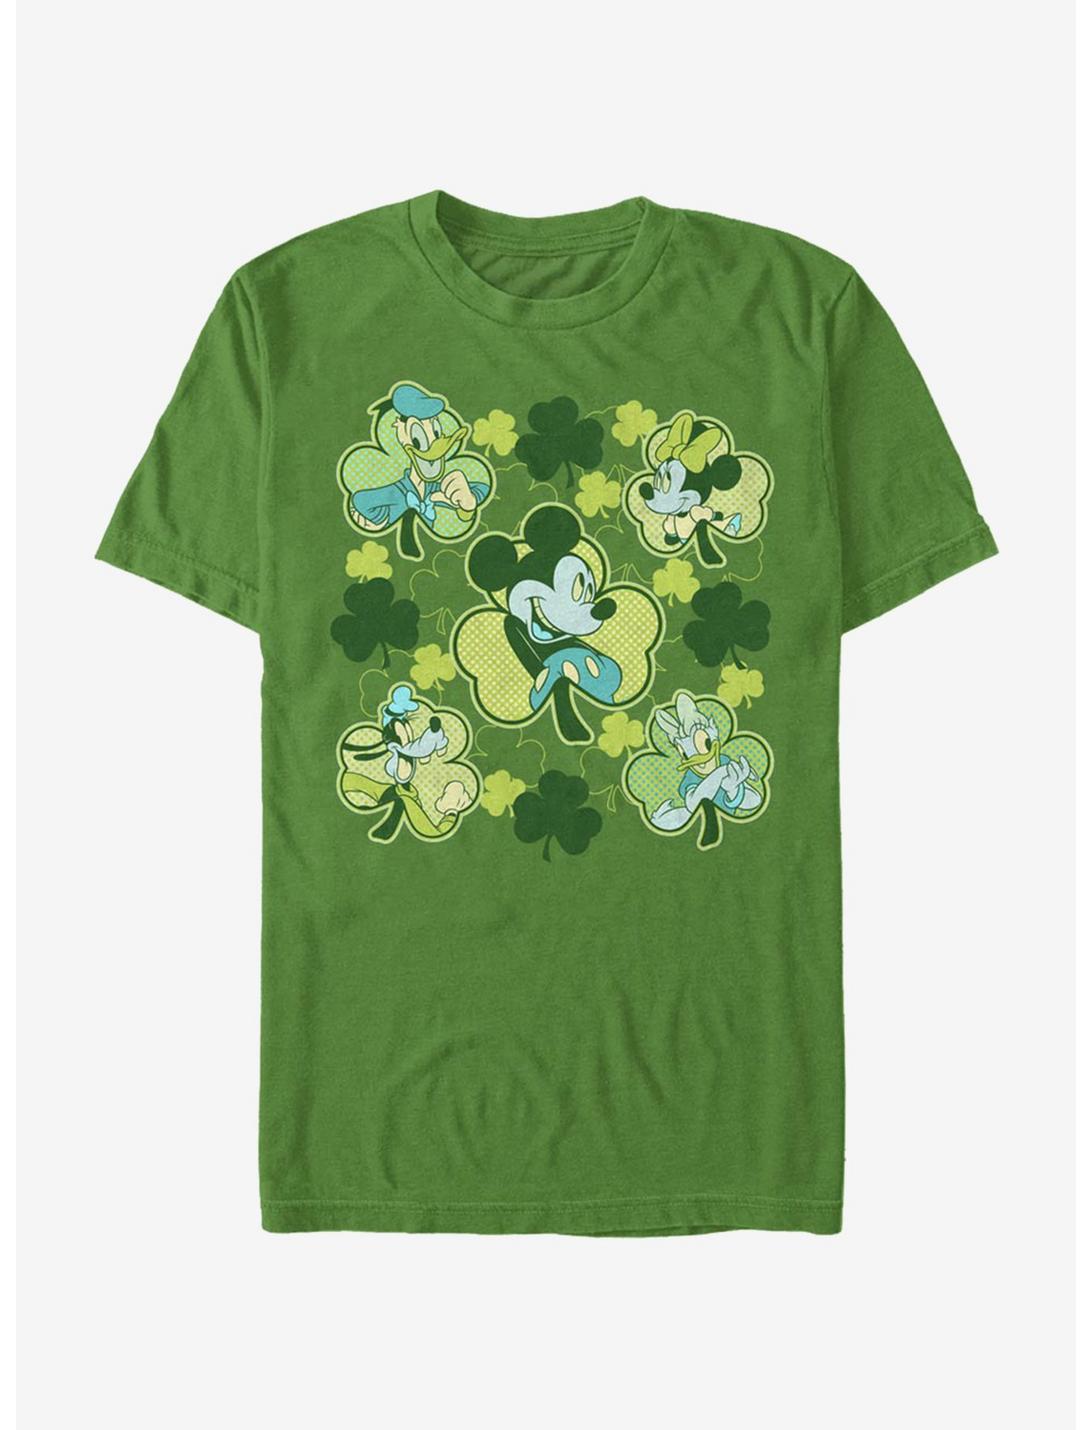 Disney Mickey Mouse & Friends Clovers T-Shirt, KELLY, hi-res